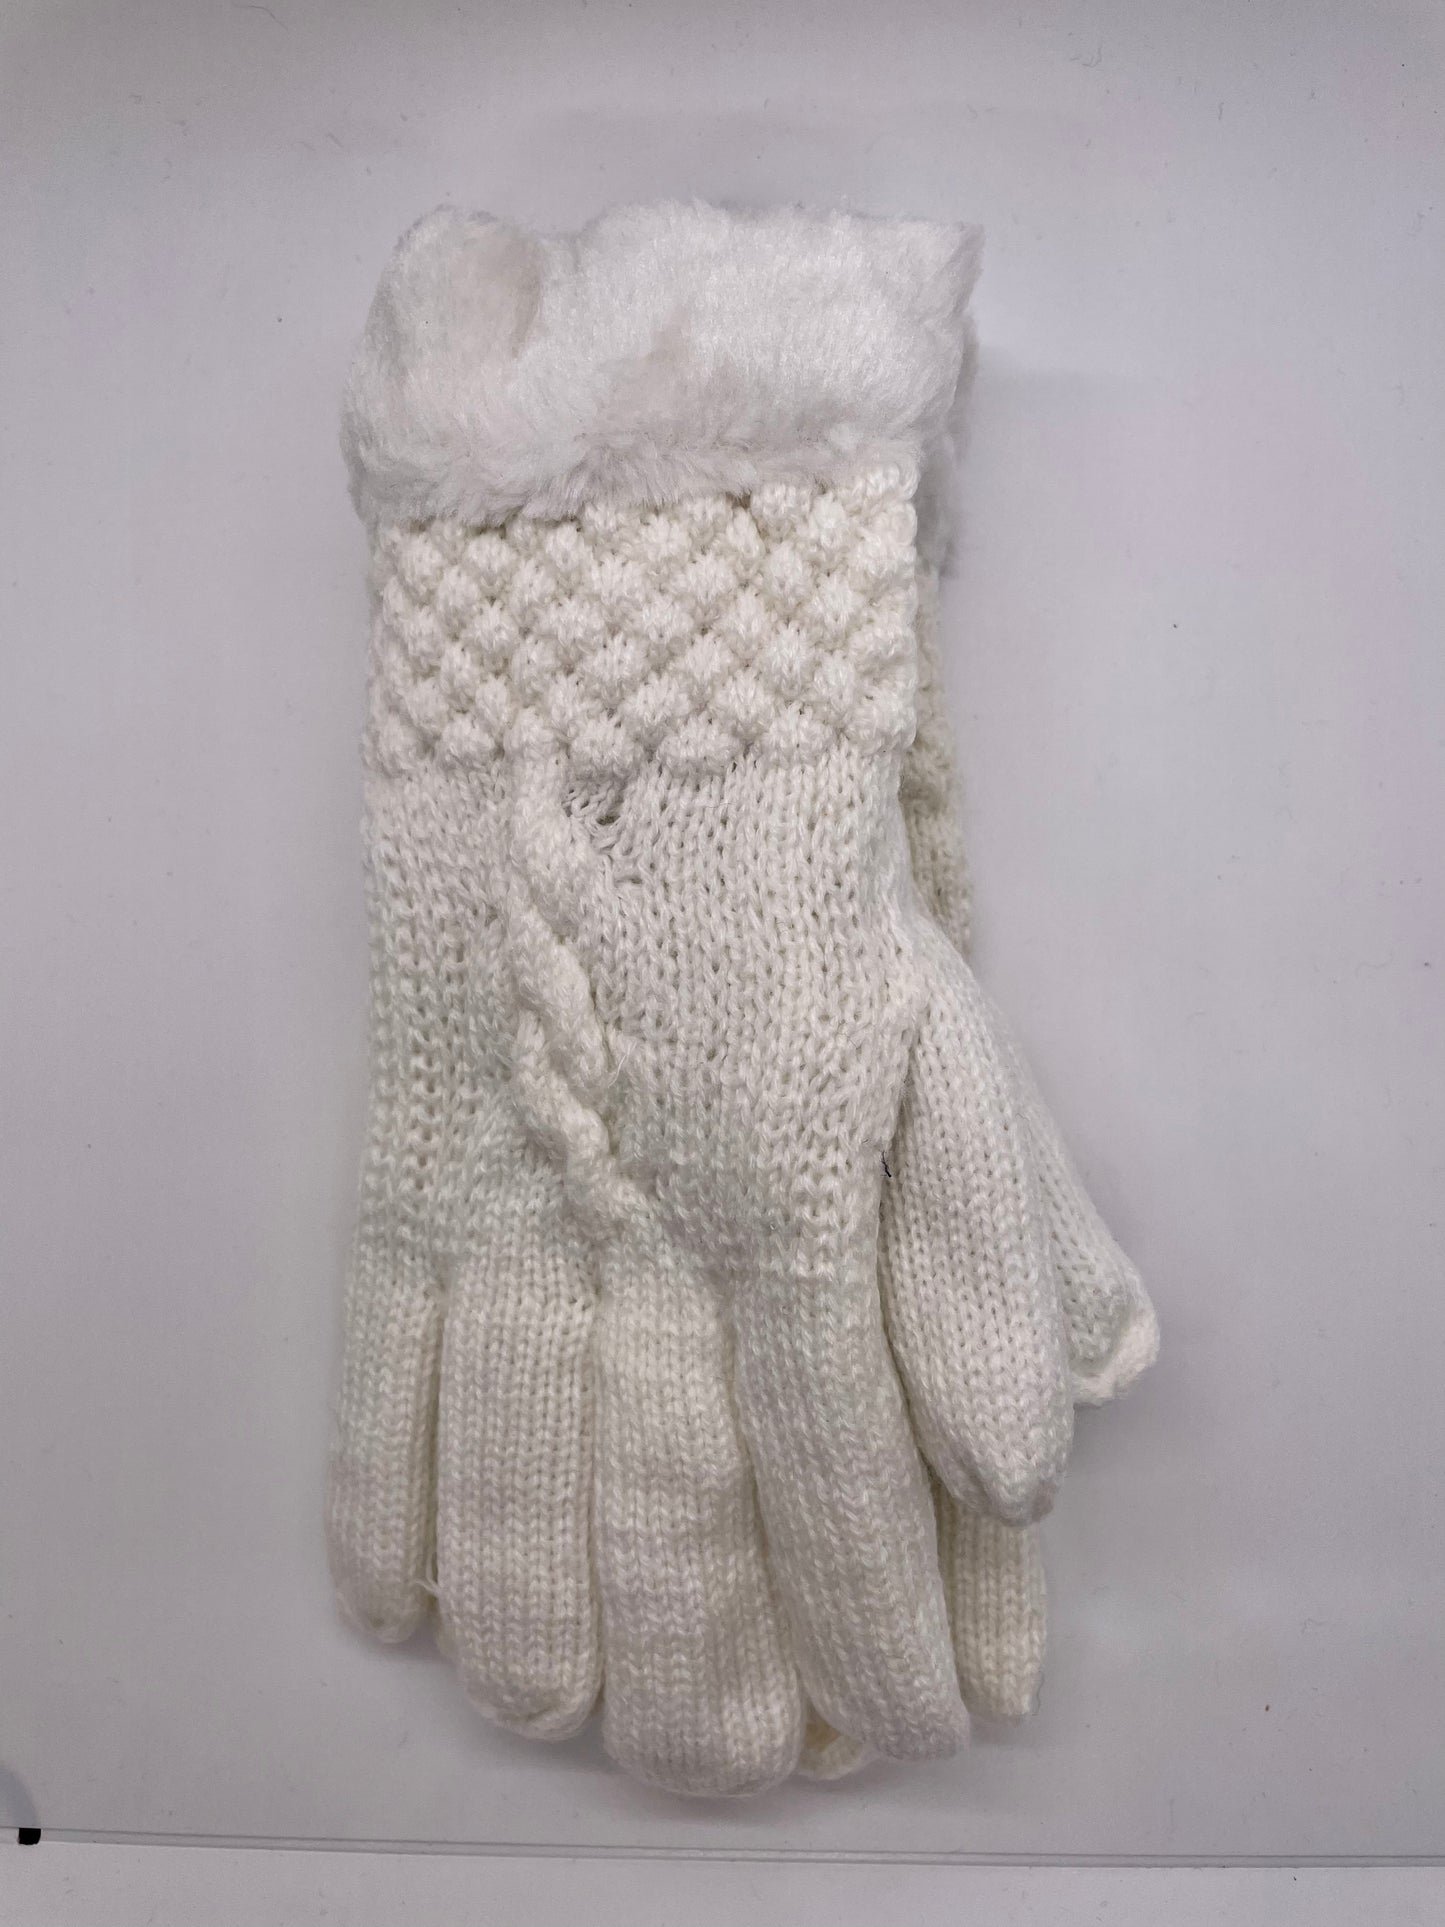 White women's winter gloves with a knit texture and a durable design